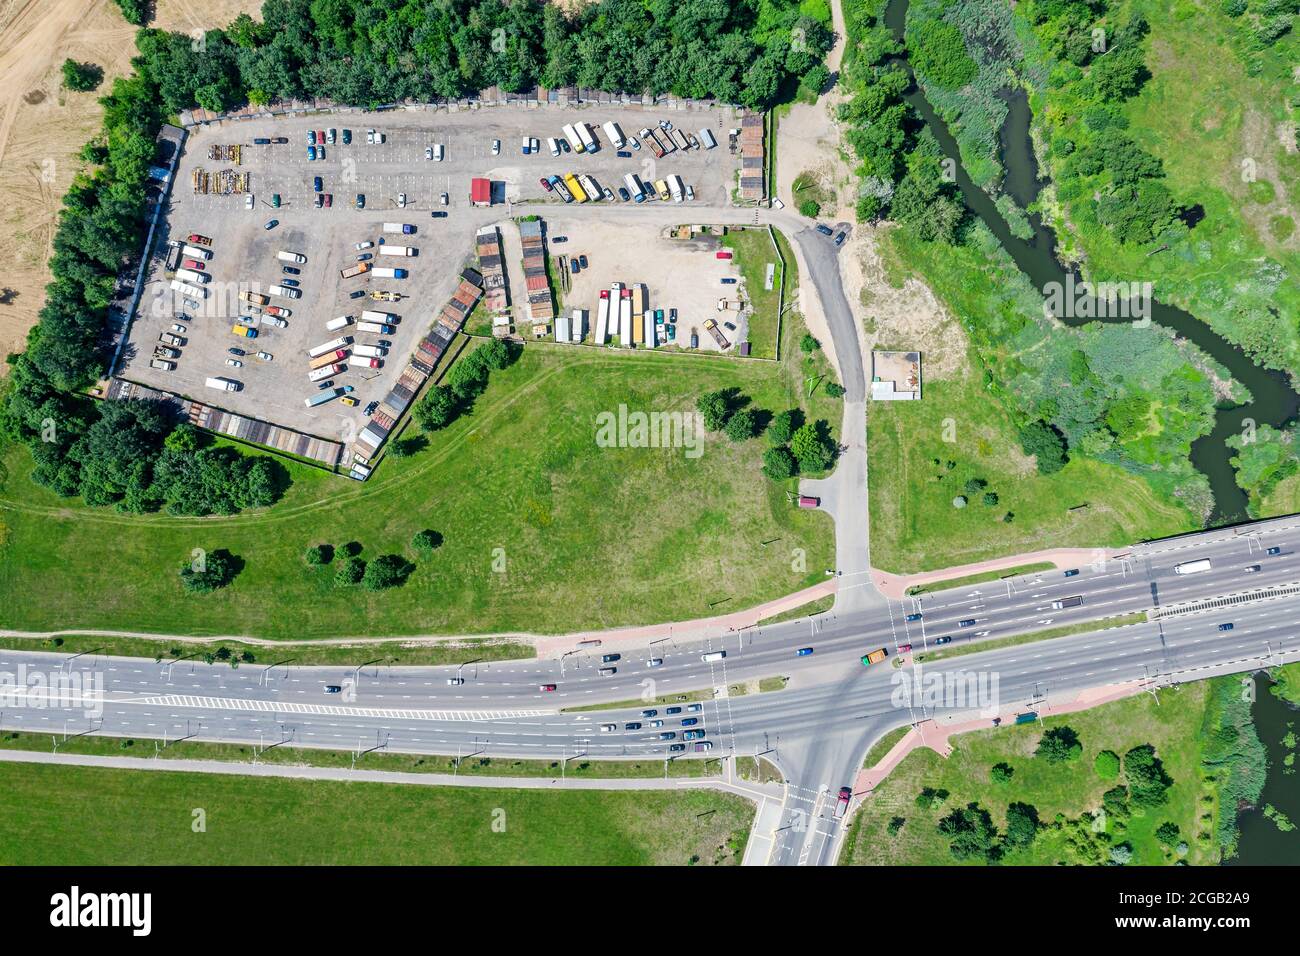 aerial drone view of a suburban road with intersection and parking lot with trucks Stock Photo